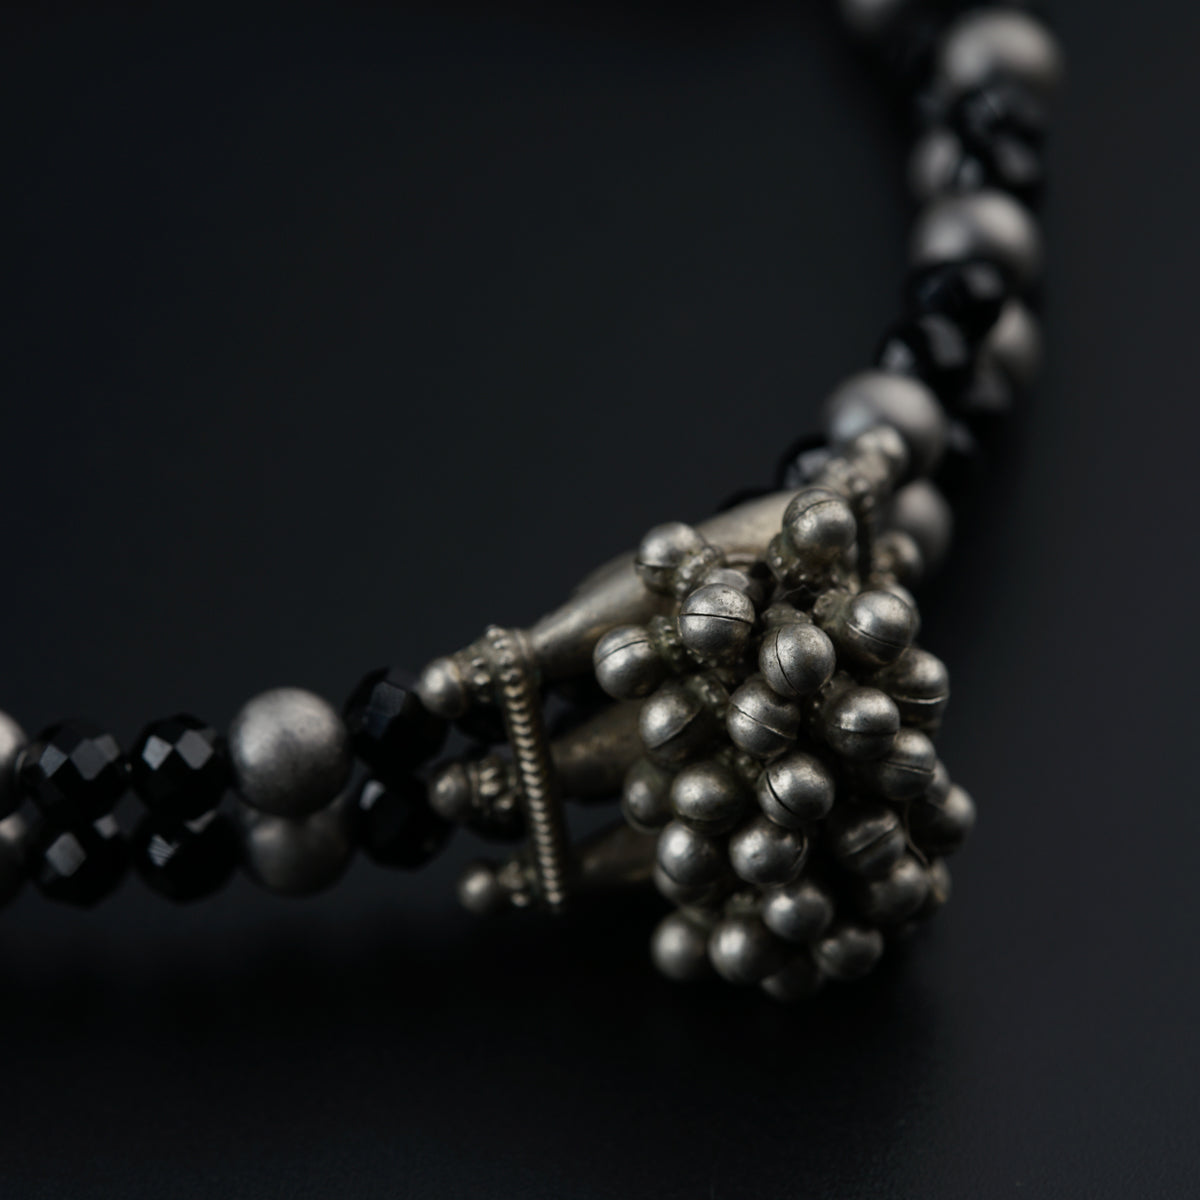 Antique Silver Choker with Black Spinel and Silver Beads